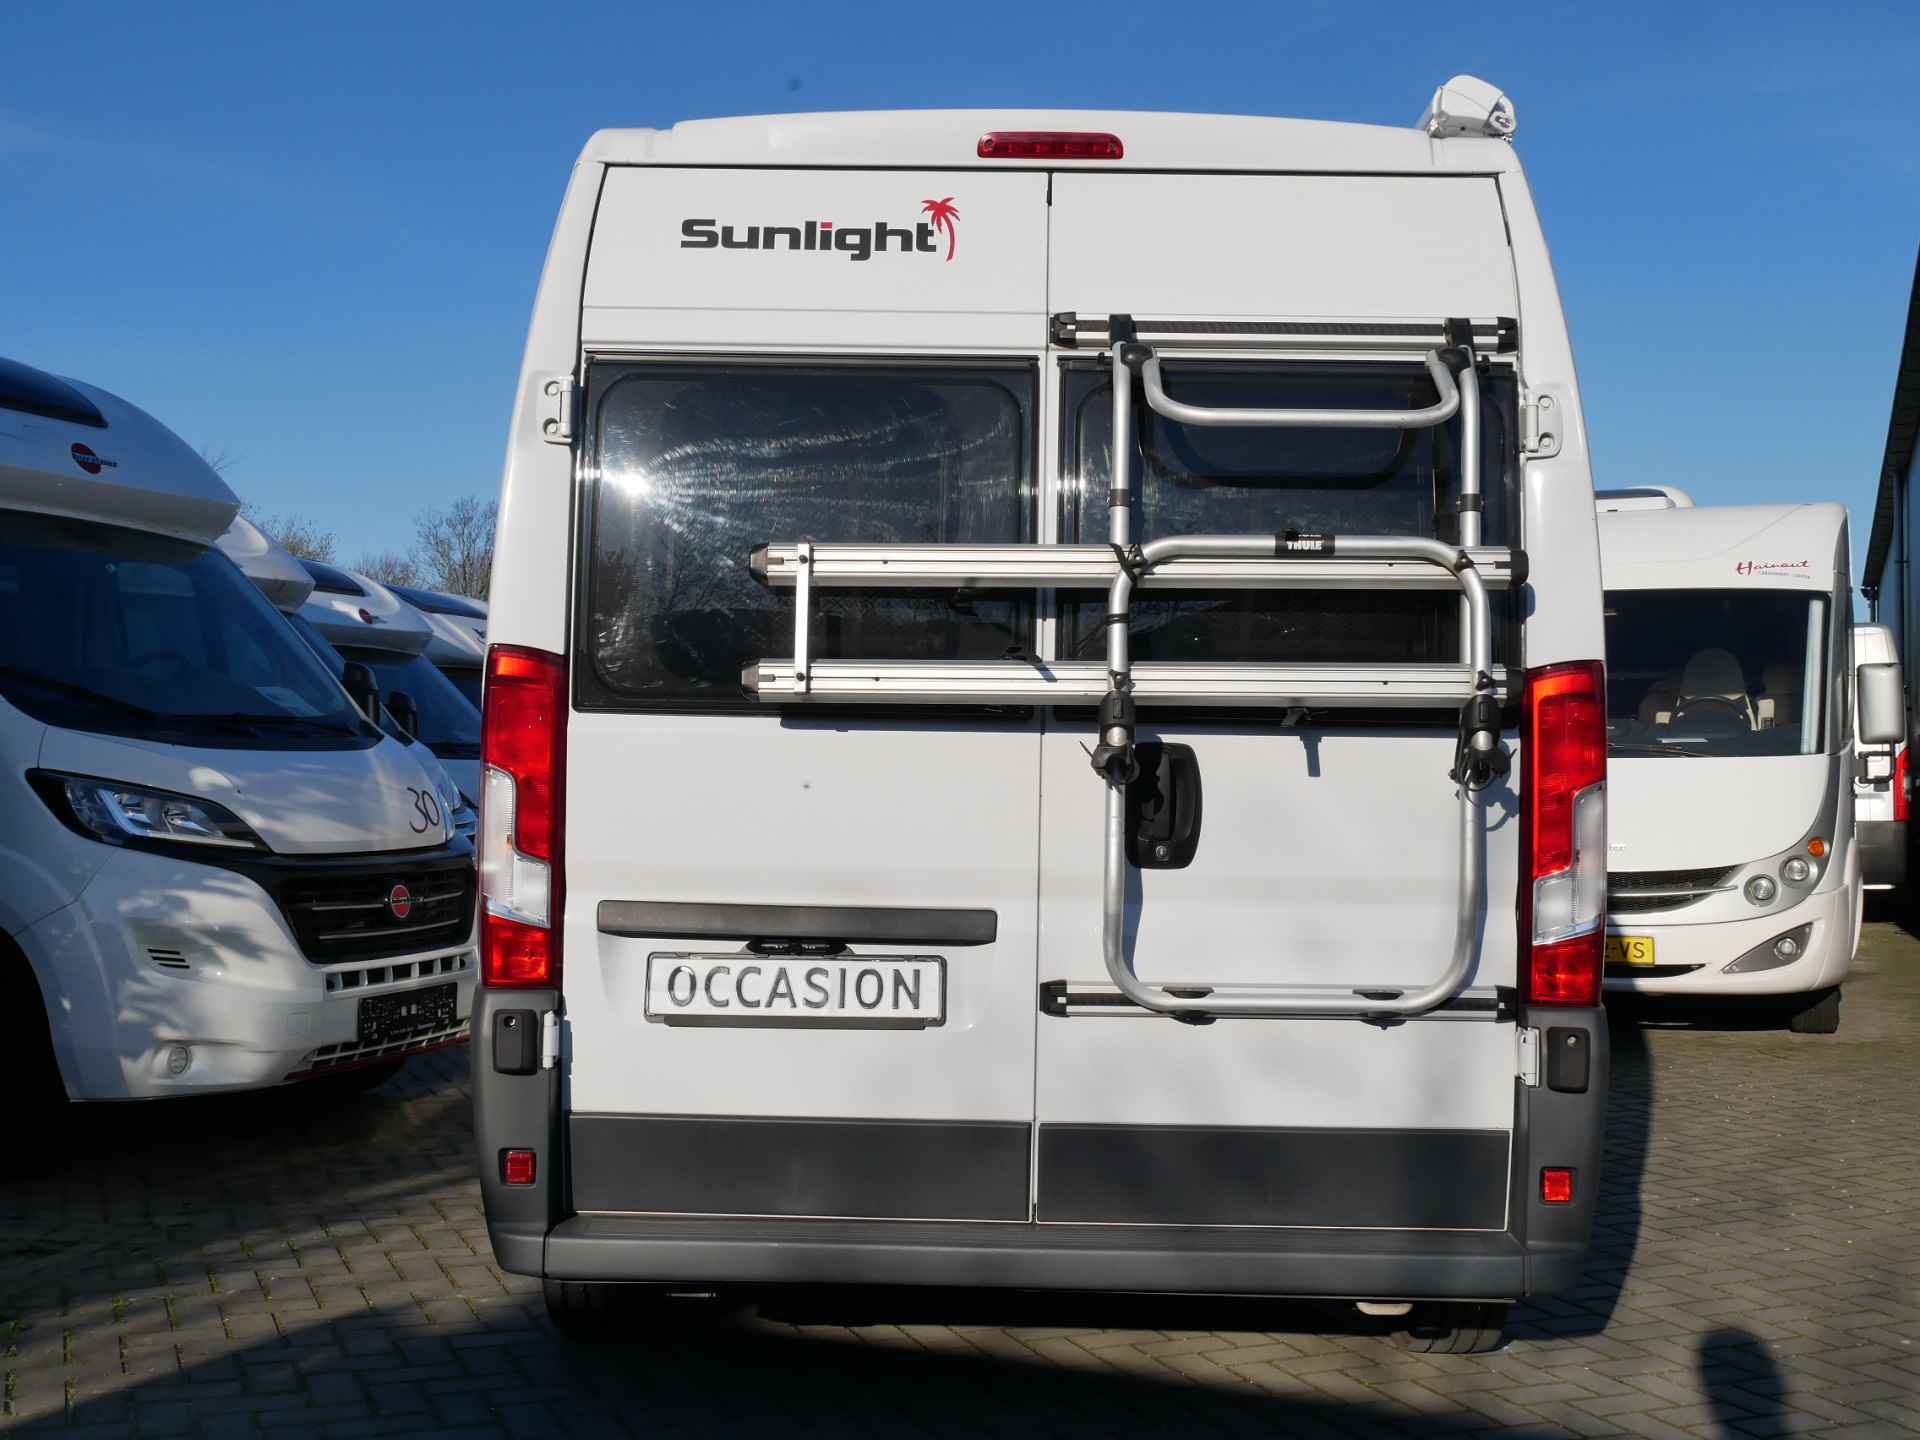 Sunlight 601 Stapelbed, 6 Meter Buscamper, 4-Pers!! - 30/30